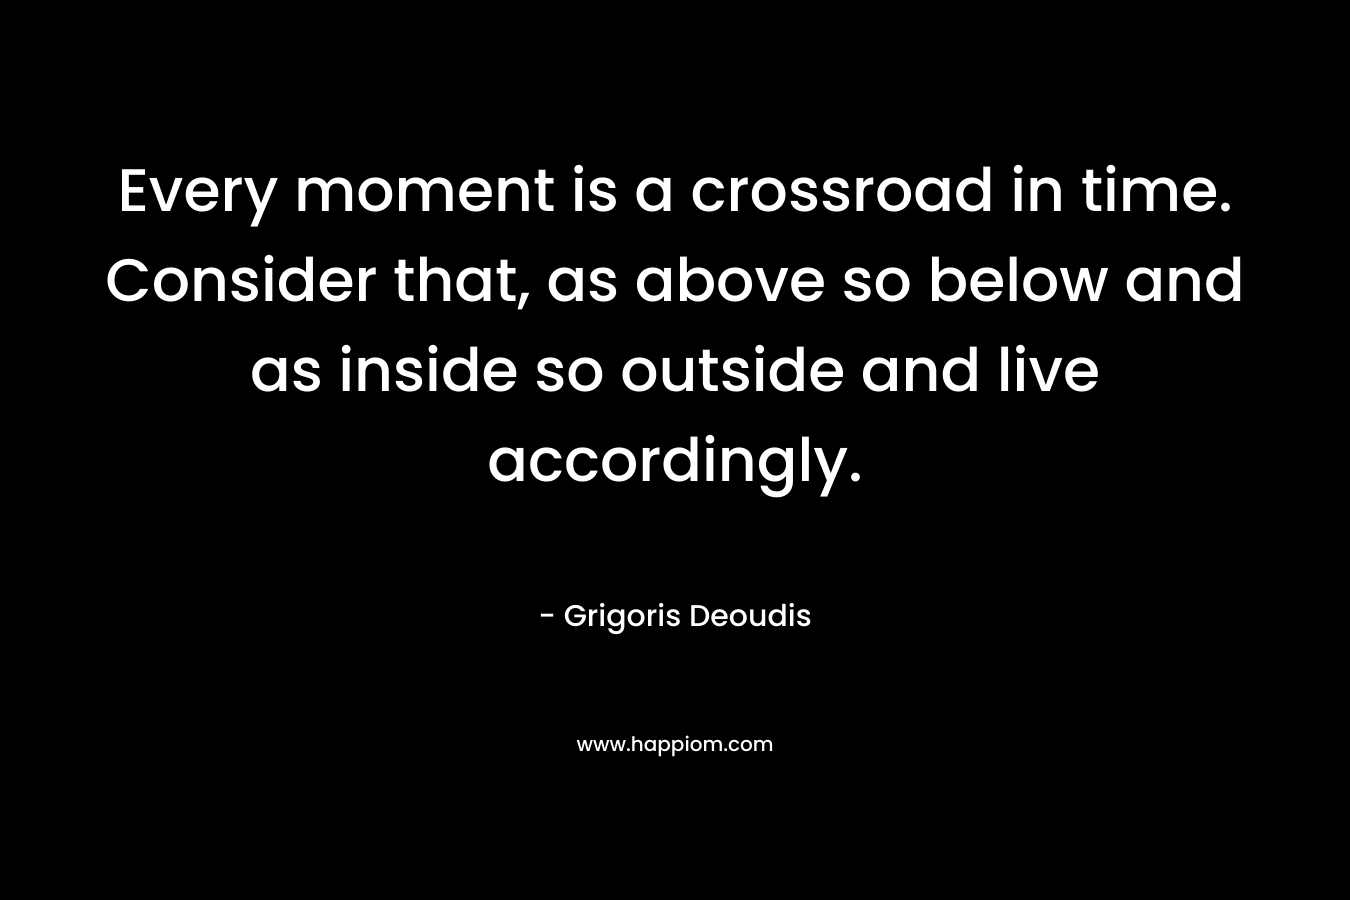 Every moment is a crossroad in time. Consider that, as above so below and as inside so outside and live accordingly.